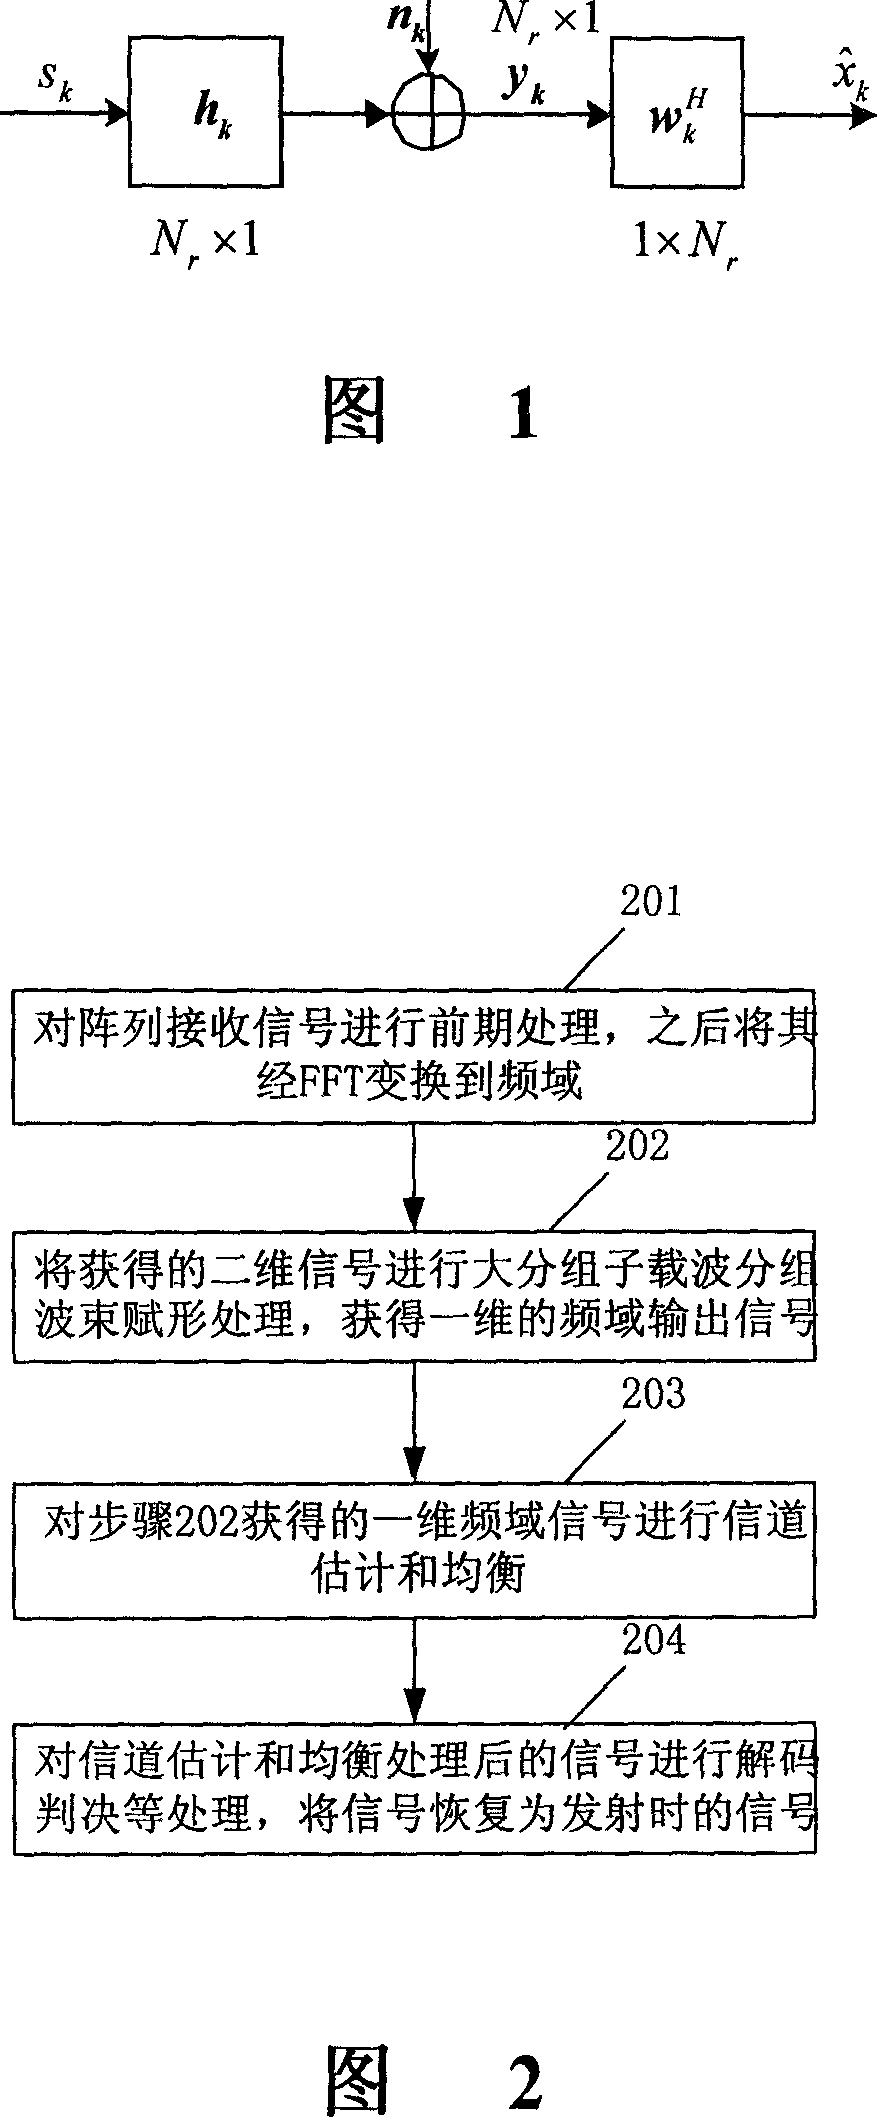 Space frequency signal processing method